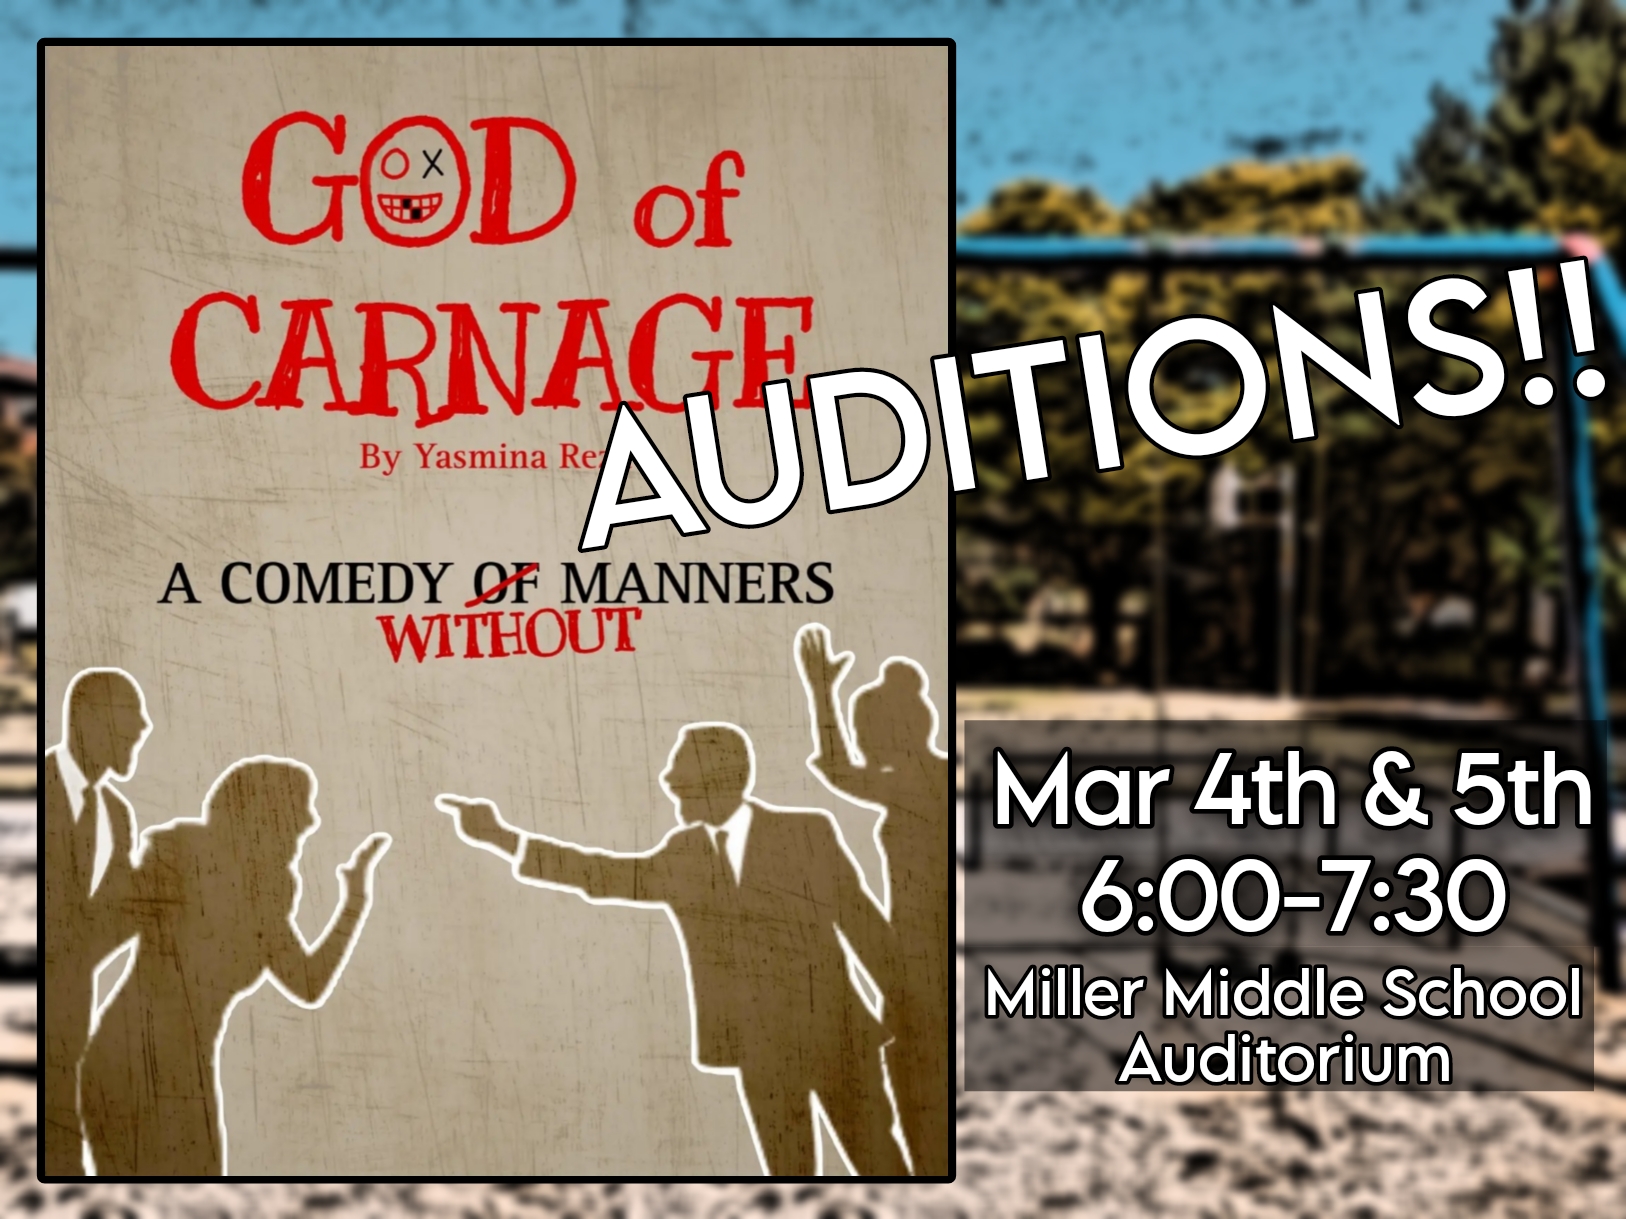 God of Carnage Auditions